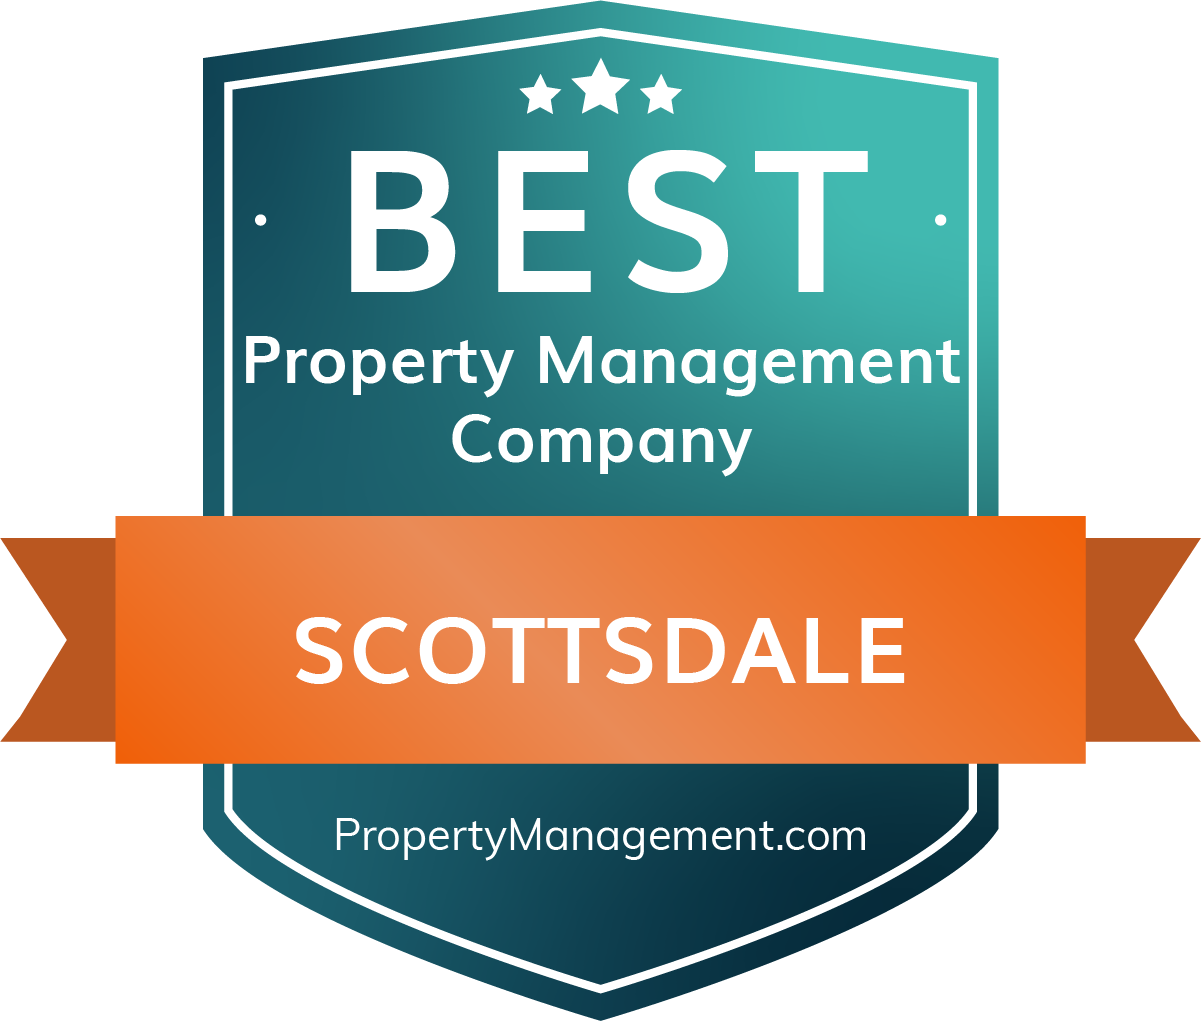 The Best Property Management Companies in Scottsdale, Arizona of 2022